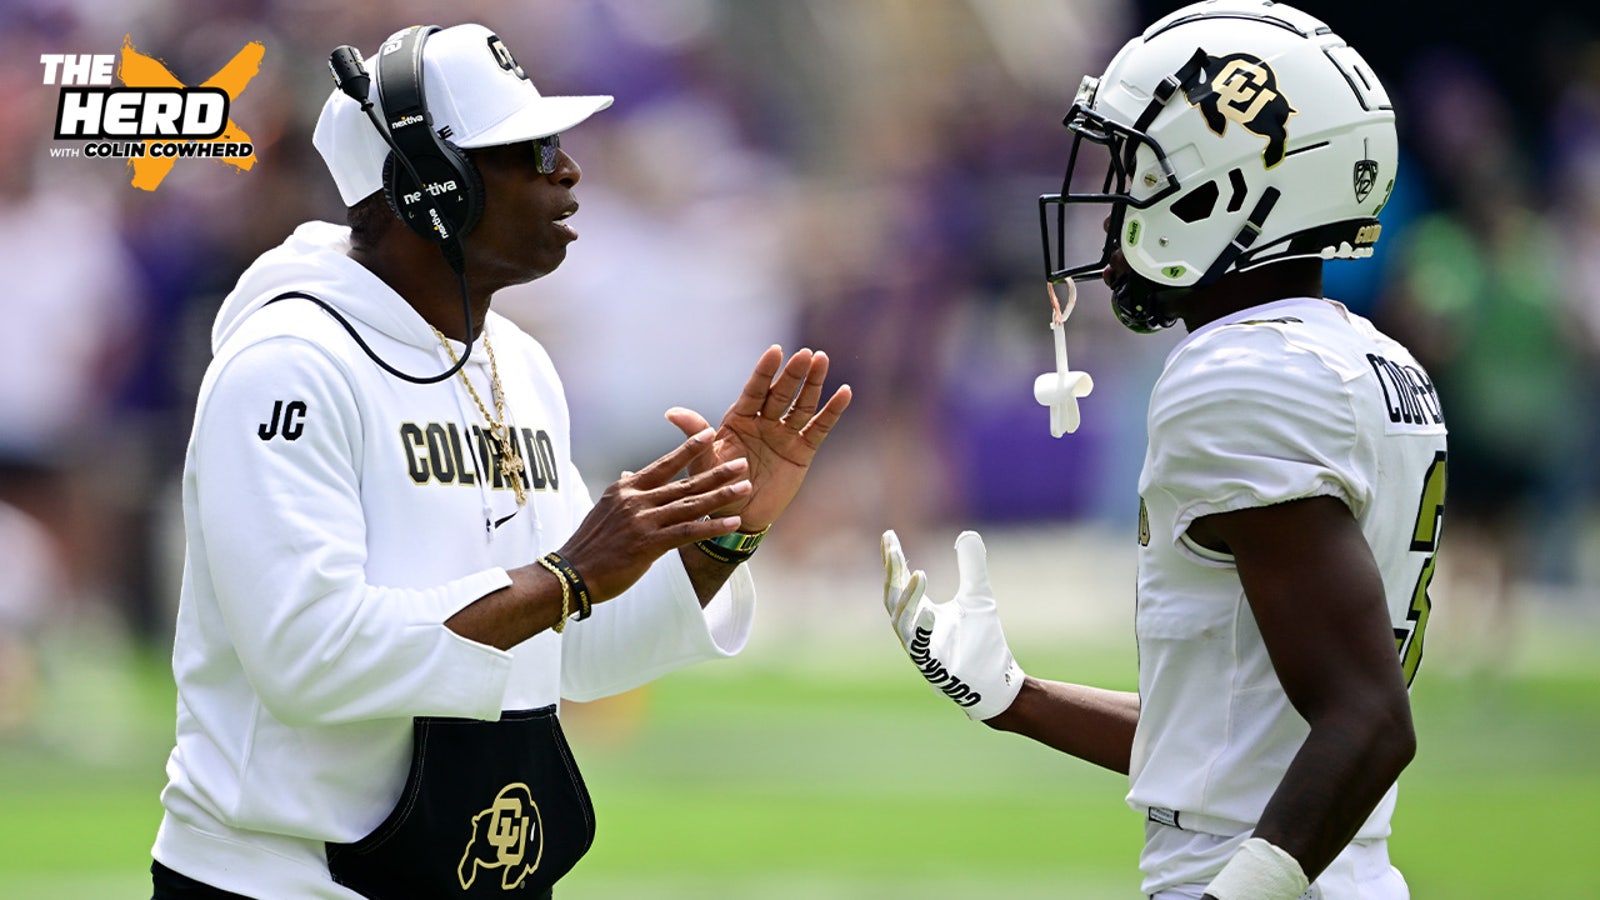 How Deion Sanders, Colorado shook up the college football world, THE HERD